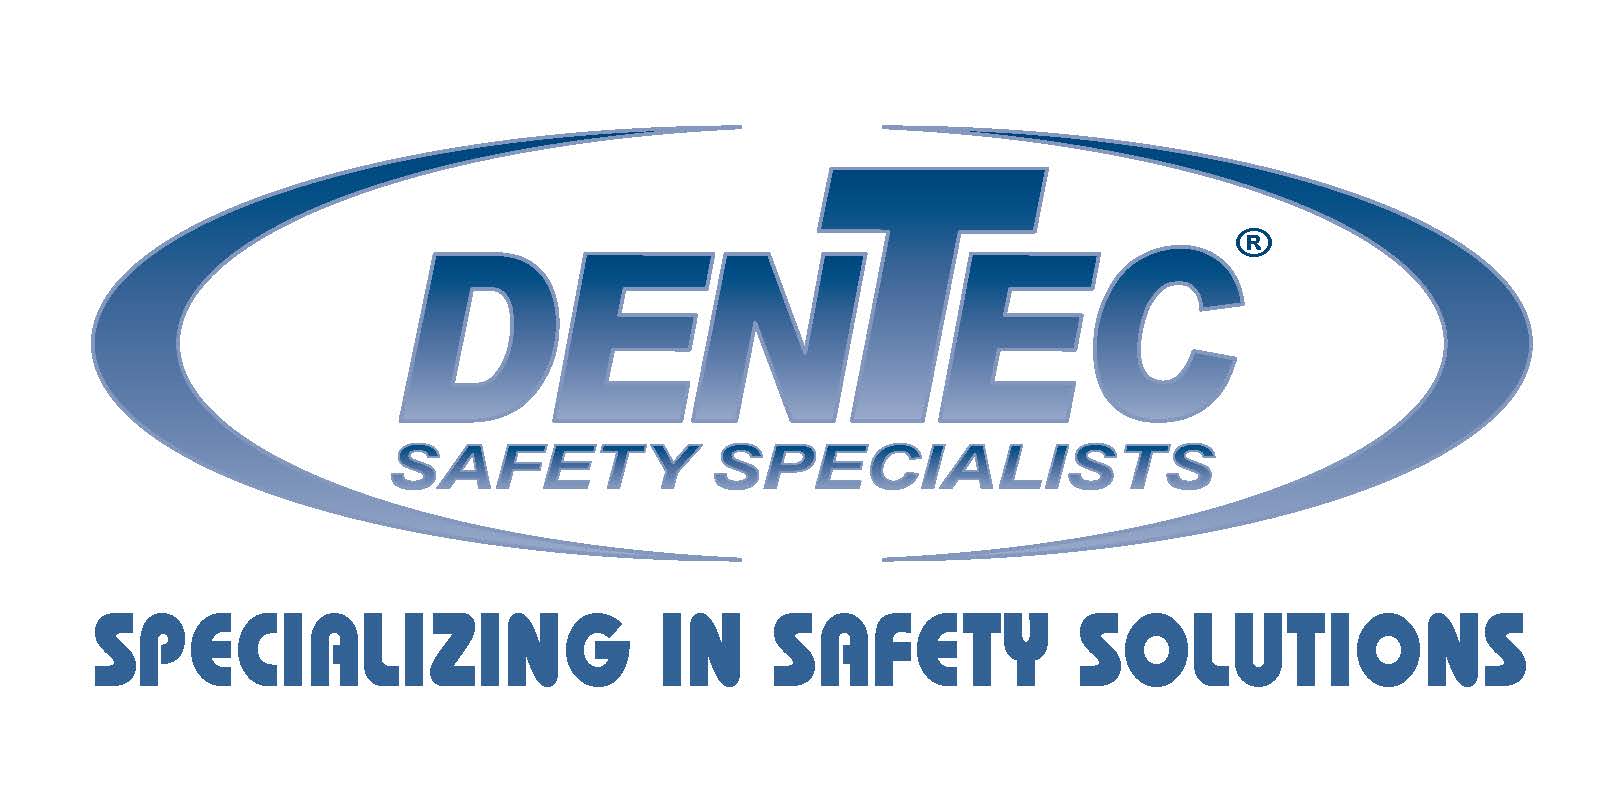 DENTEC SAFETY SPECIALISTS INC.